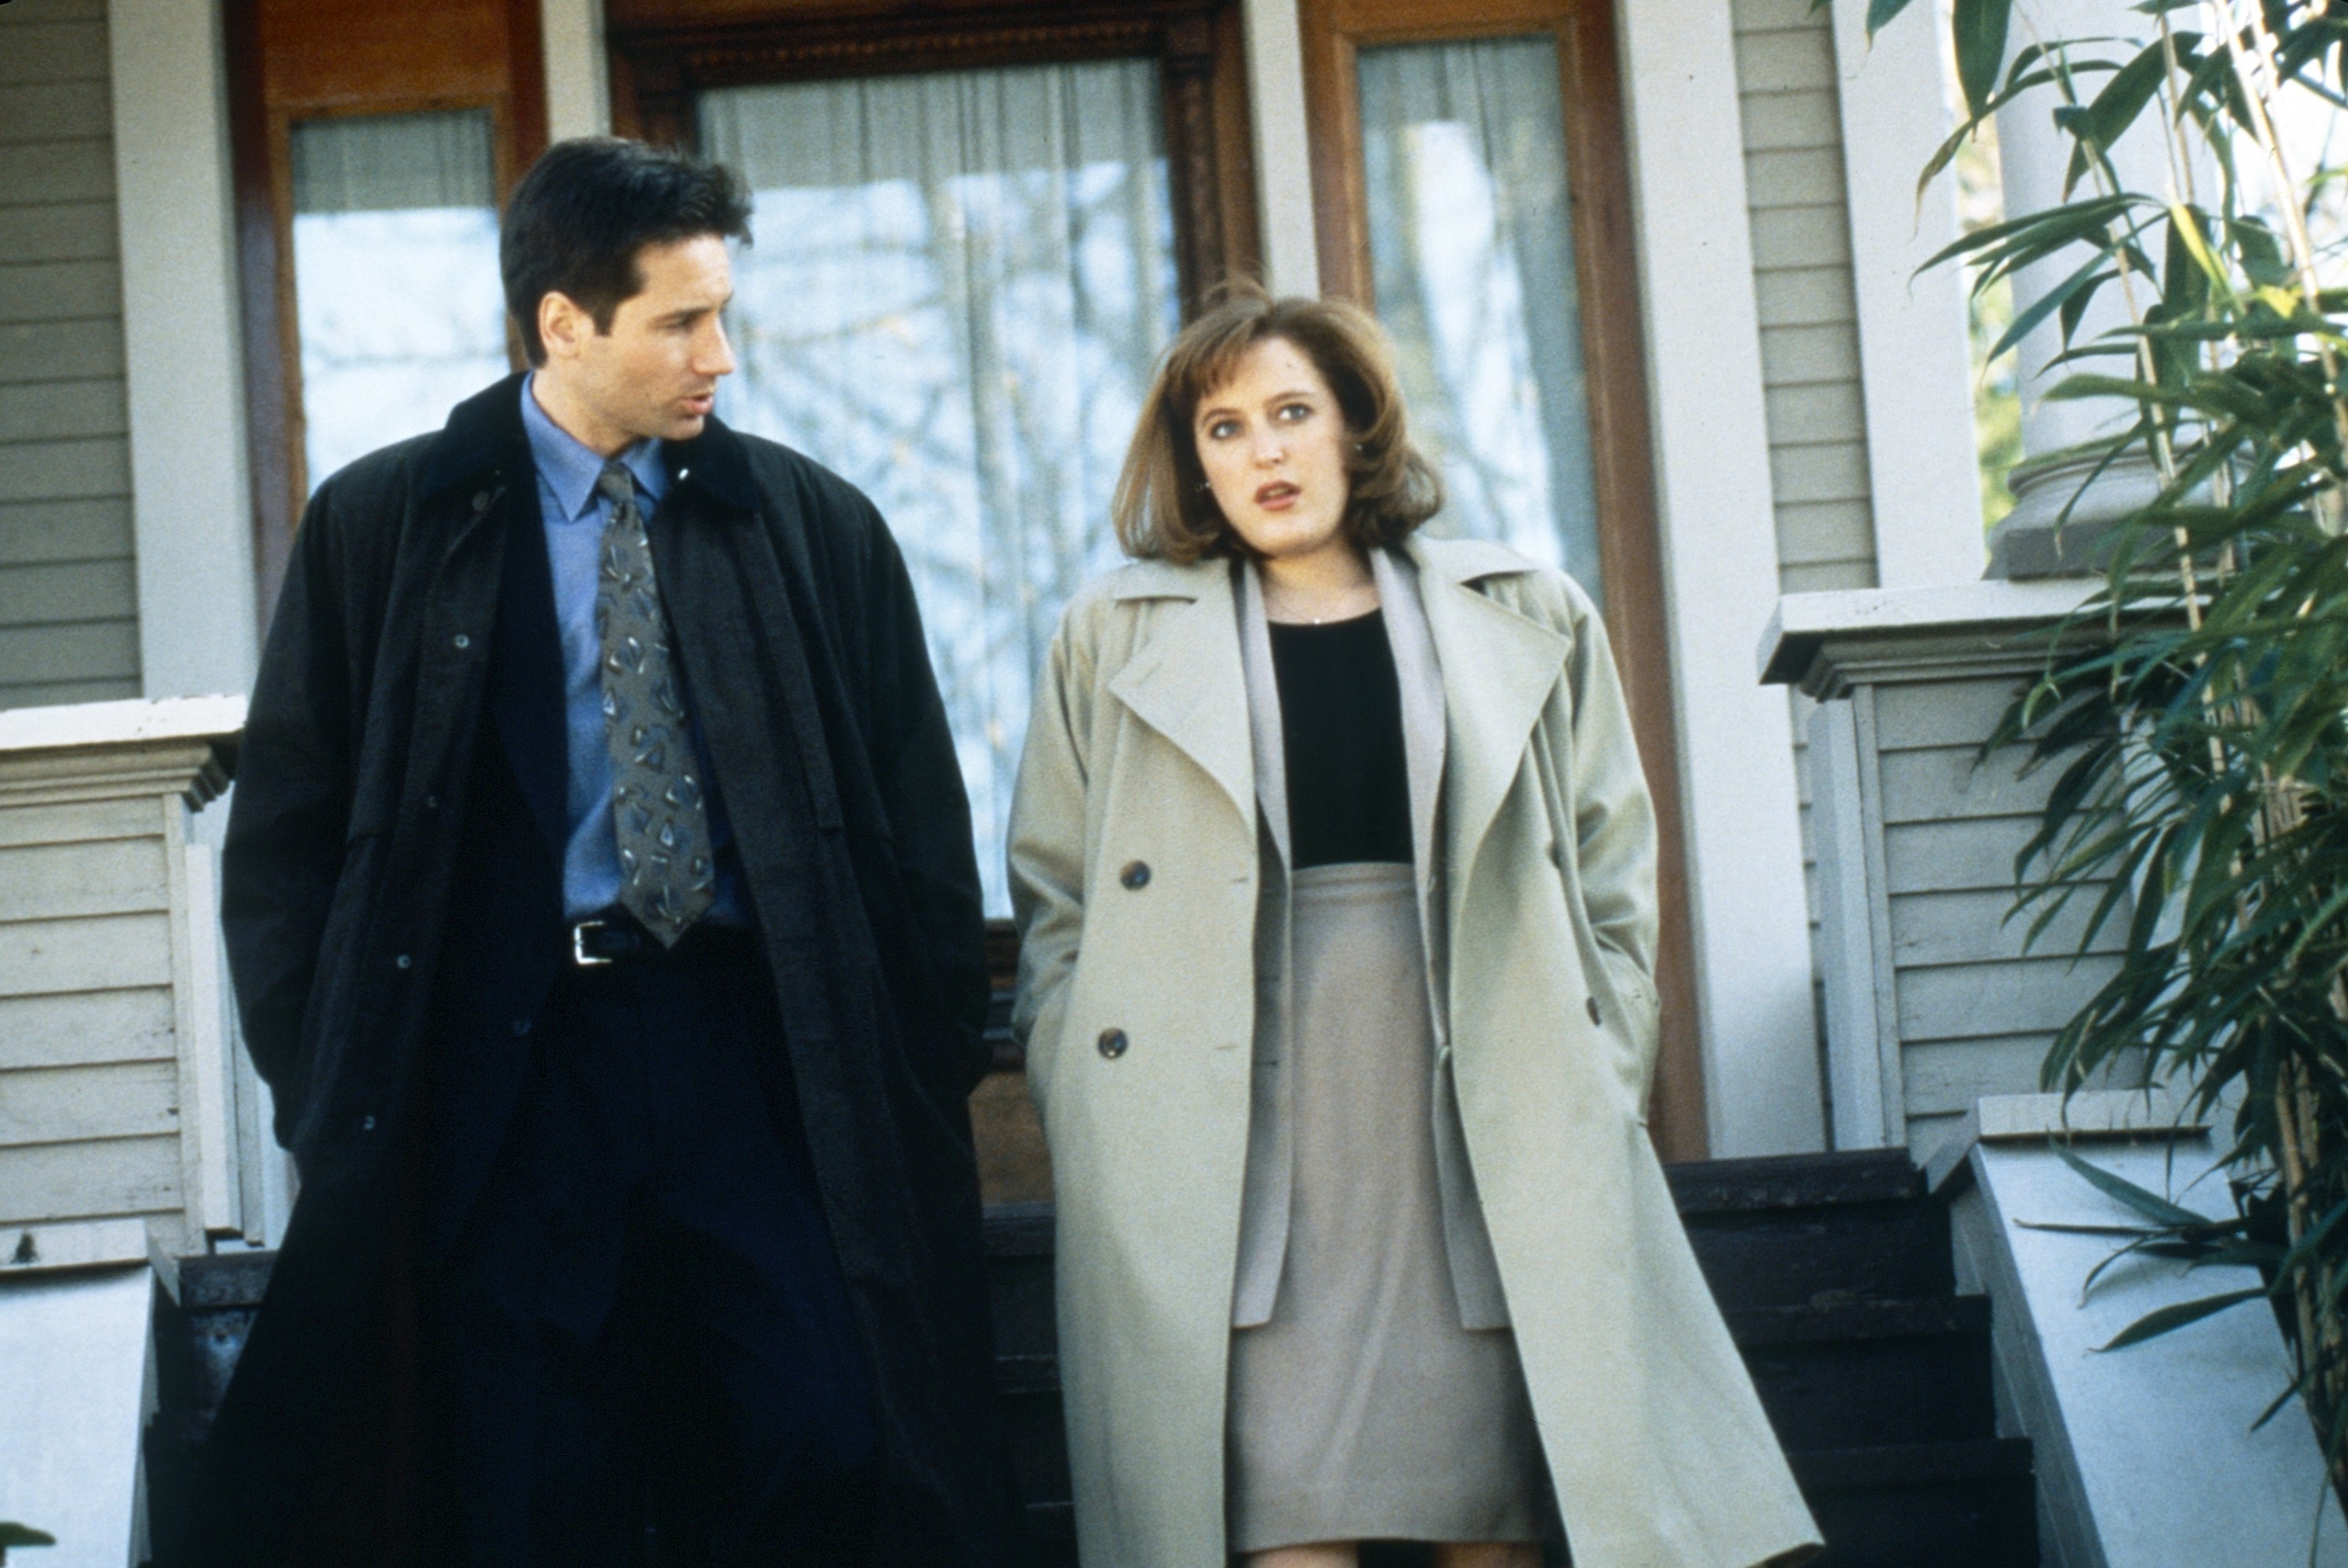 David Duchovny and Gillian Anderson walk down the stairs outside a house